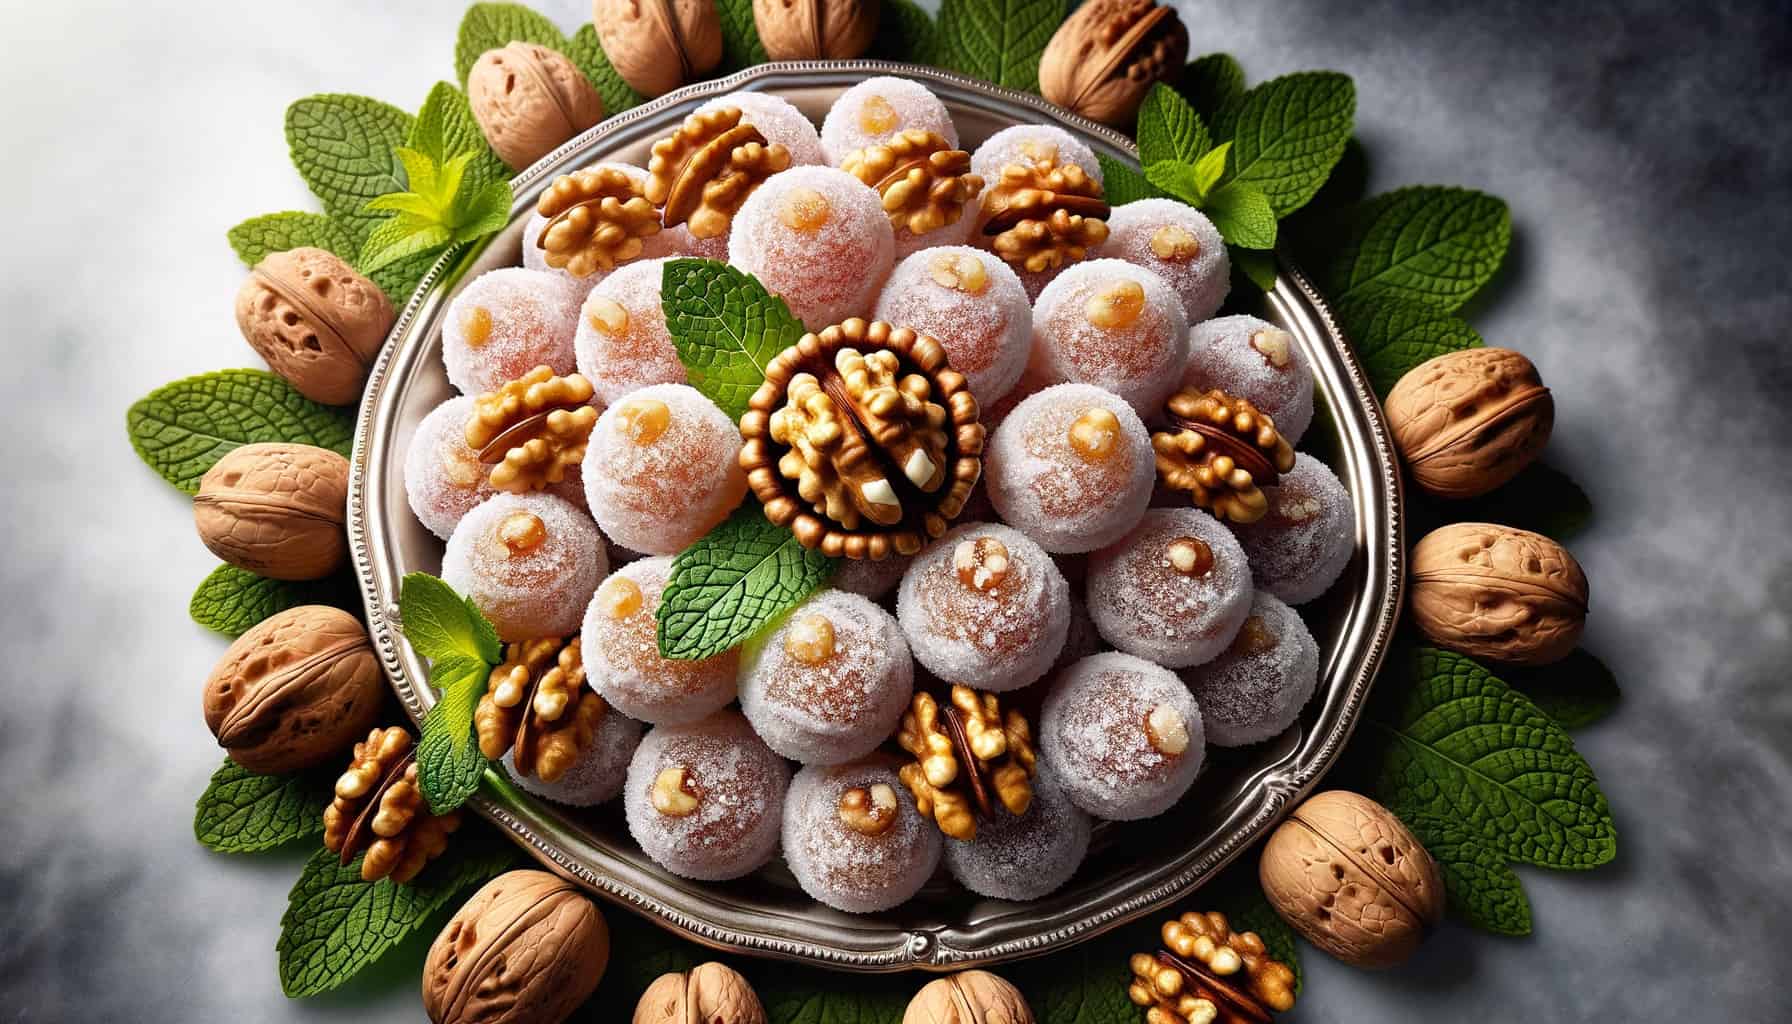 Camafeu de nozes (walnut candies) served on a silver platter. Accompanied by decorative mint leaves, the candies gleam with their sugar coating, each topped with a walnut piece.